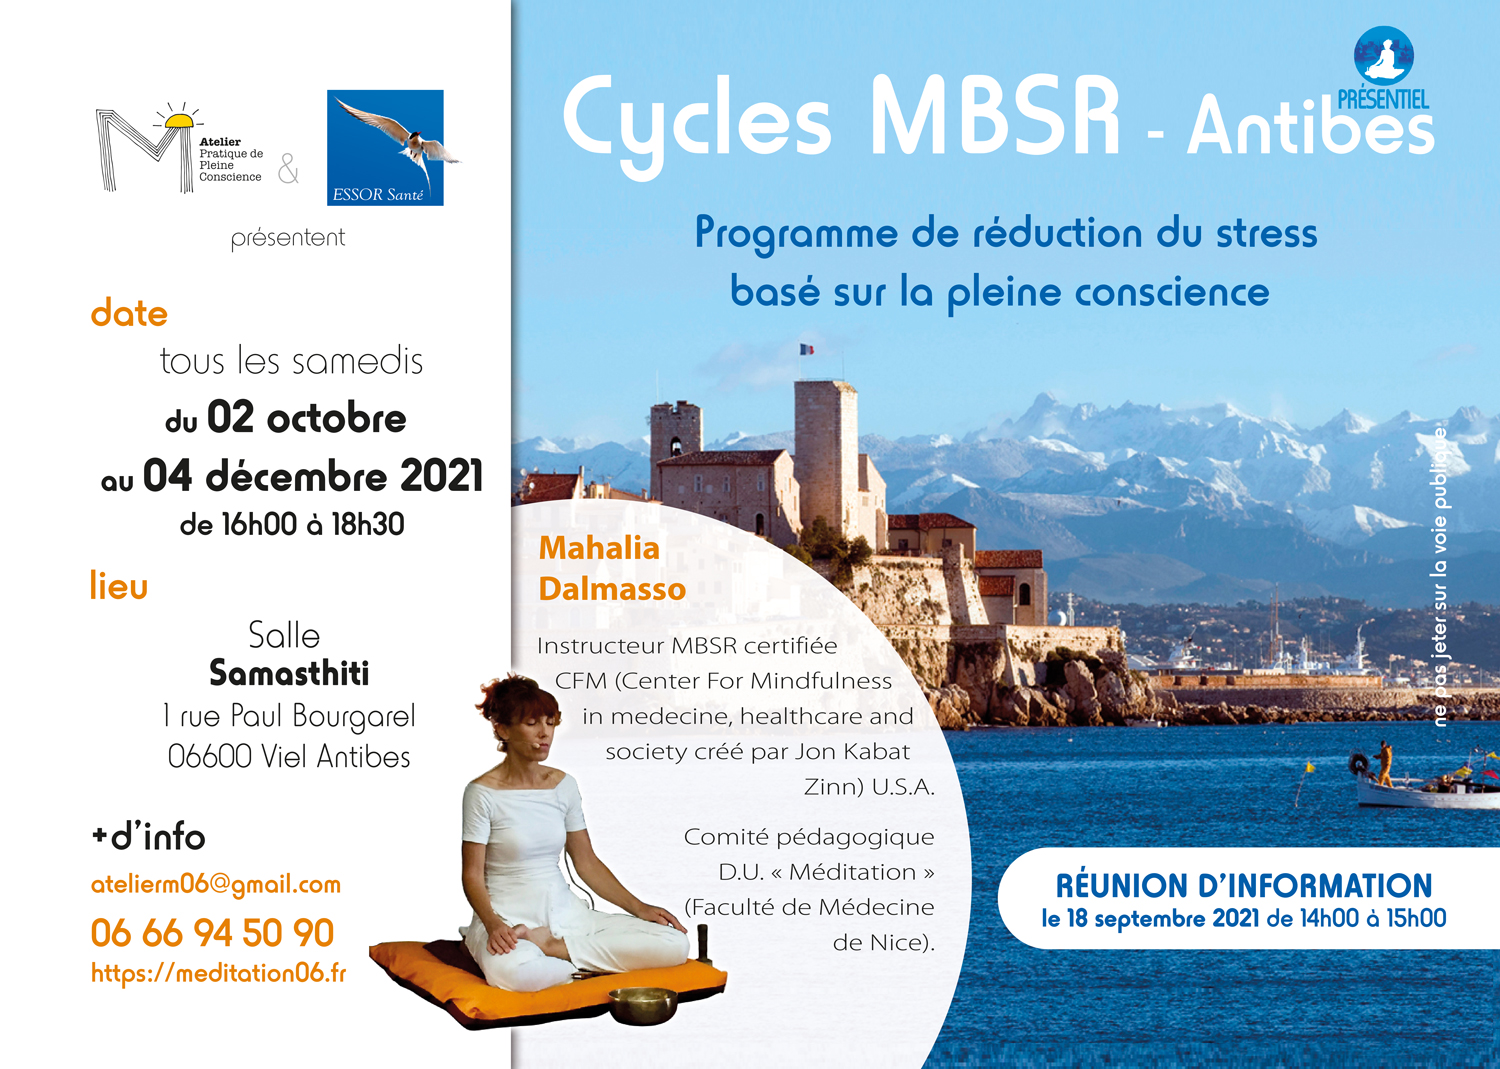 cycles MBSR antibes 2021